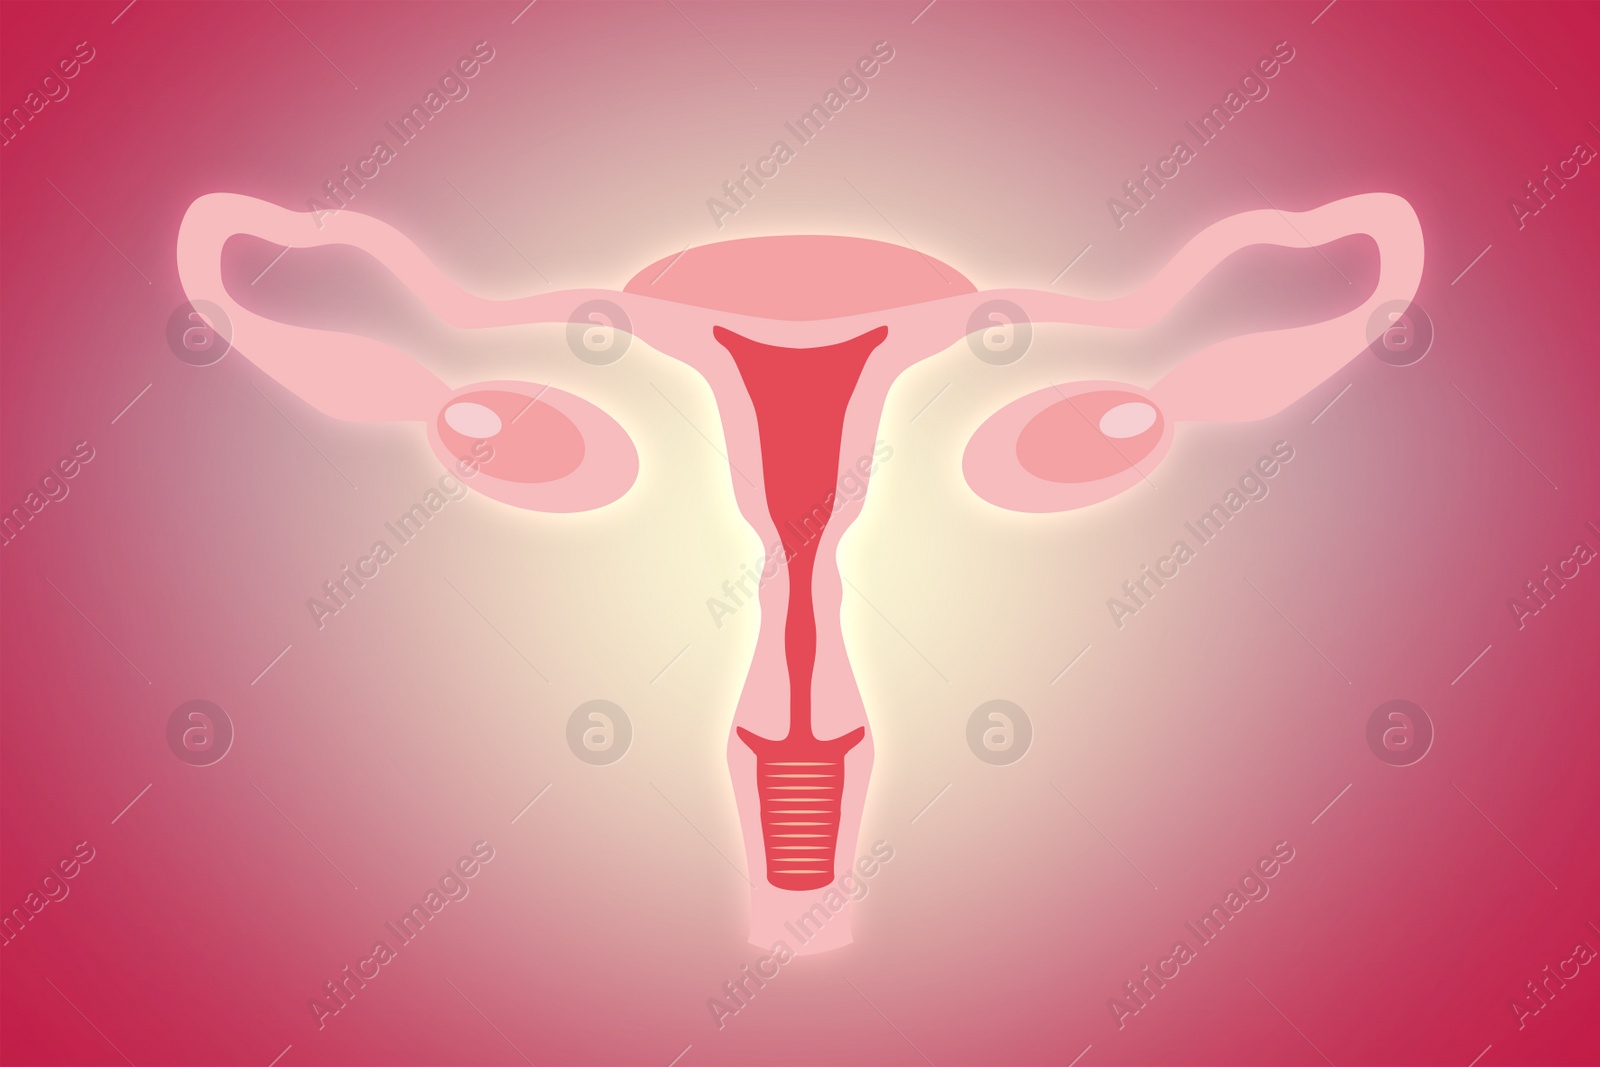 Illustration of  female reproductive system on pink background